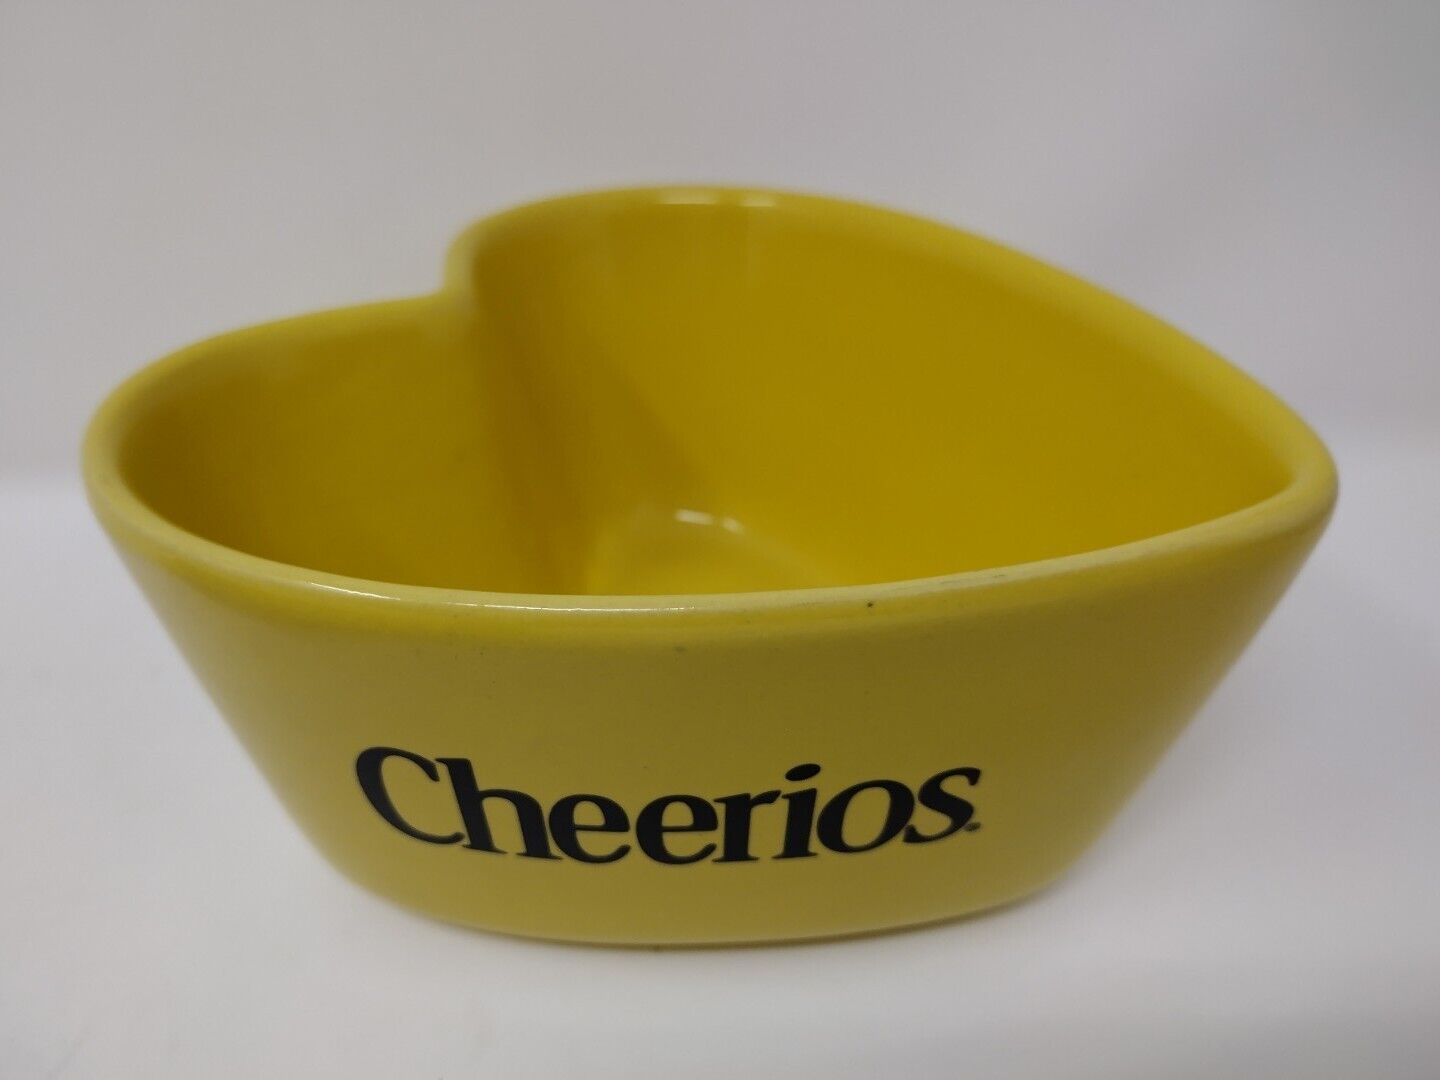 2003 Cheerios Heart Shaped Yellow Bowl Ceramic General Mills Collectible Cereal